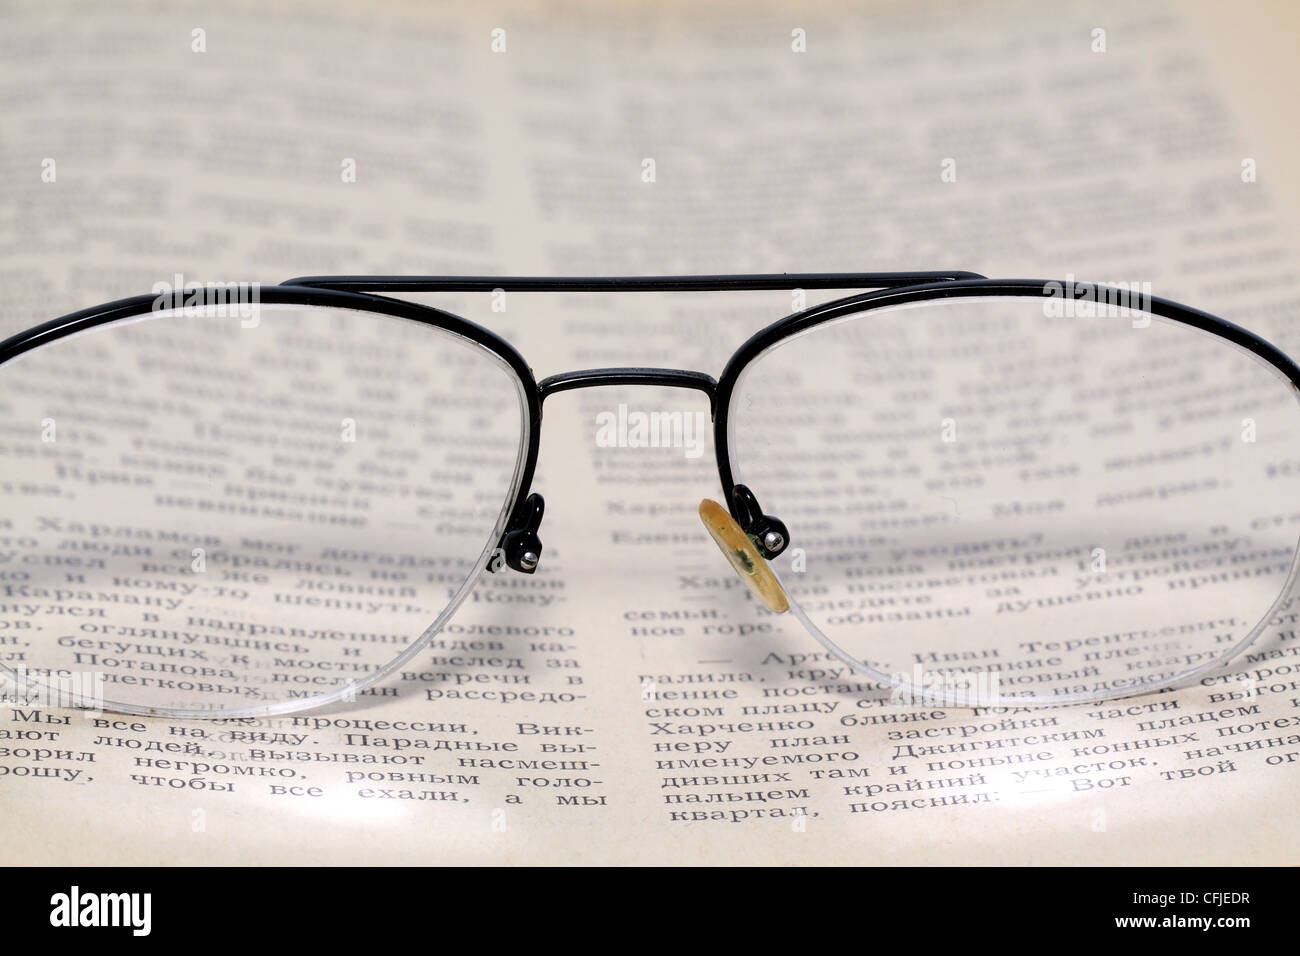 spectacles on old book Stock Photo